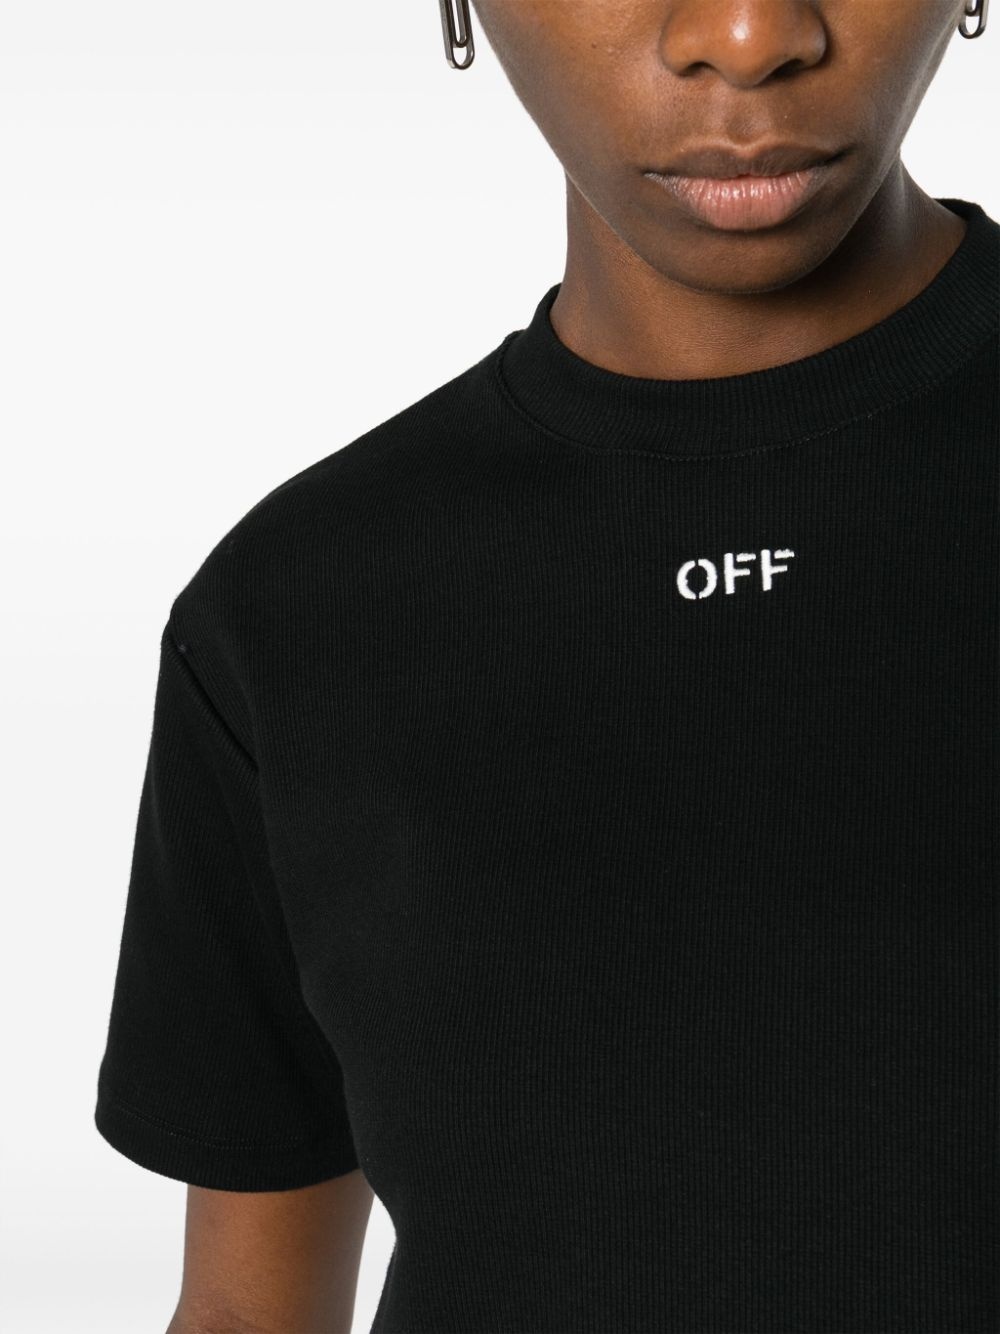 Off-Stamp cropped T-shirt - 5